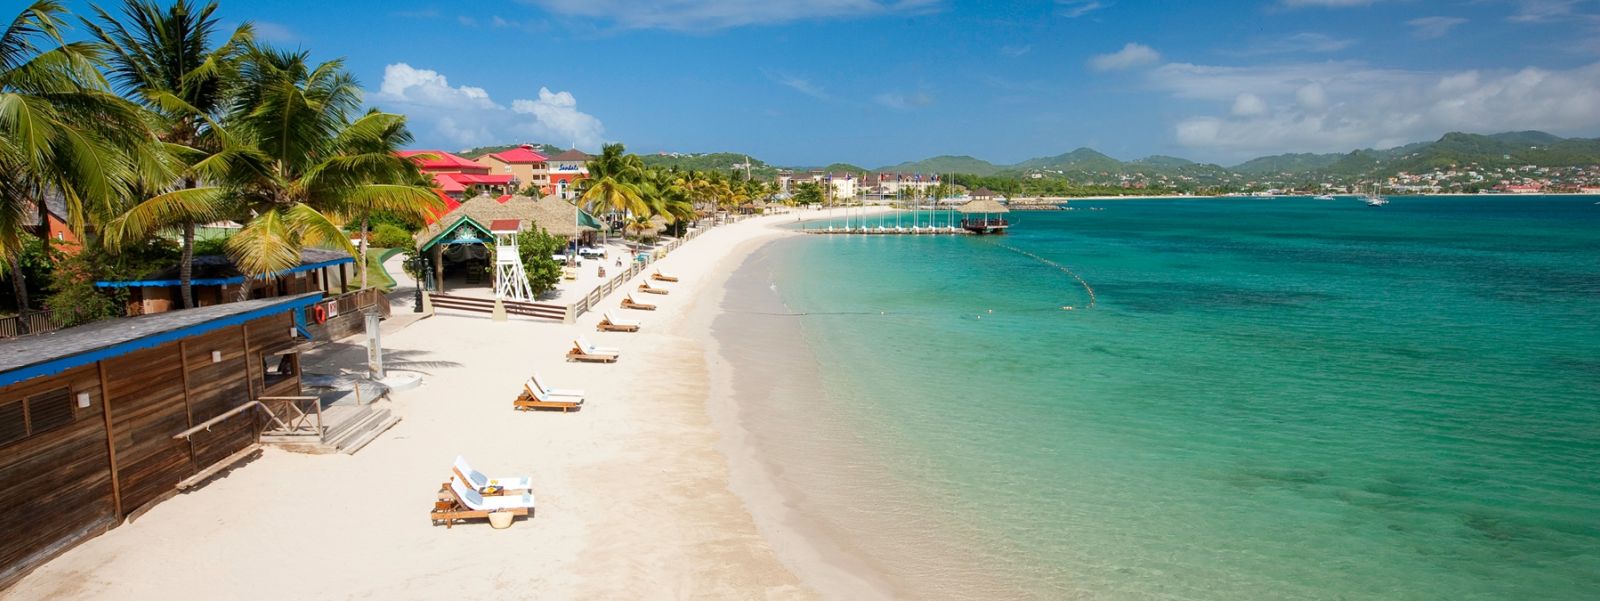 Download Sandals Grande St Lucian Spa Beach Resort In St Lucia St